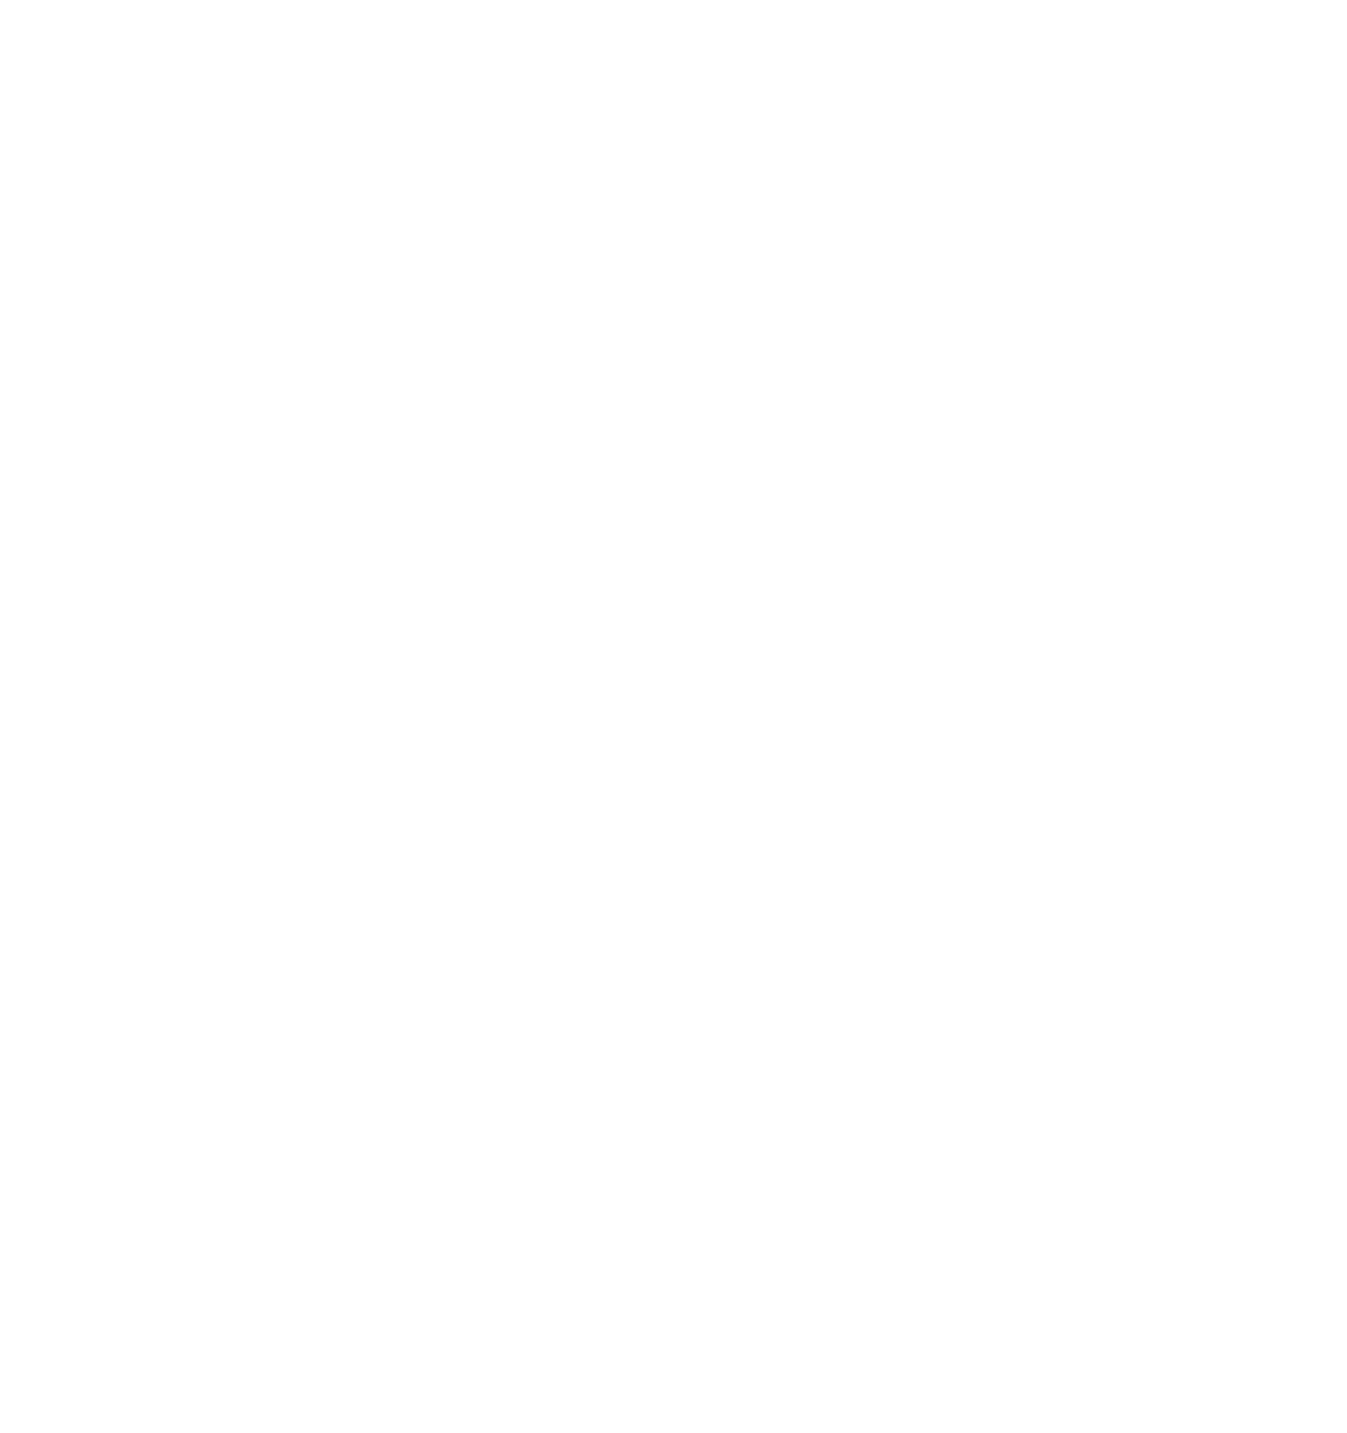 The Summer Berry Comapny